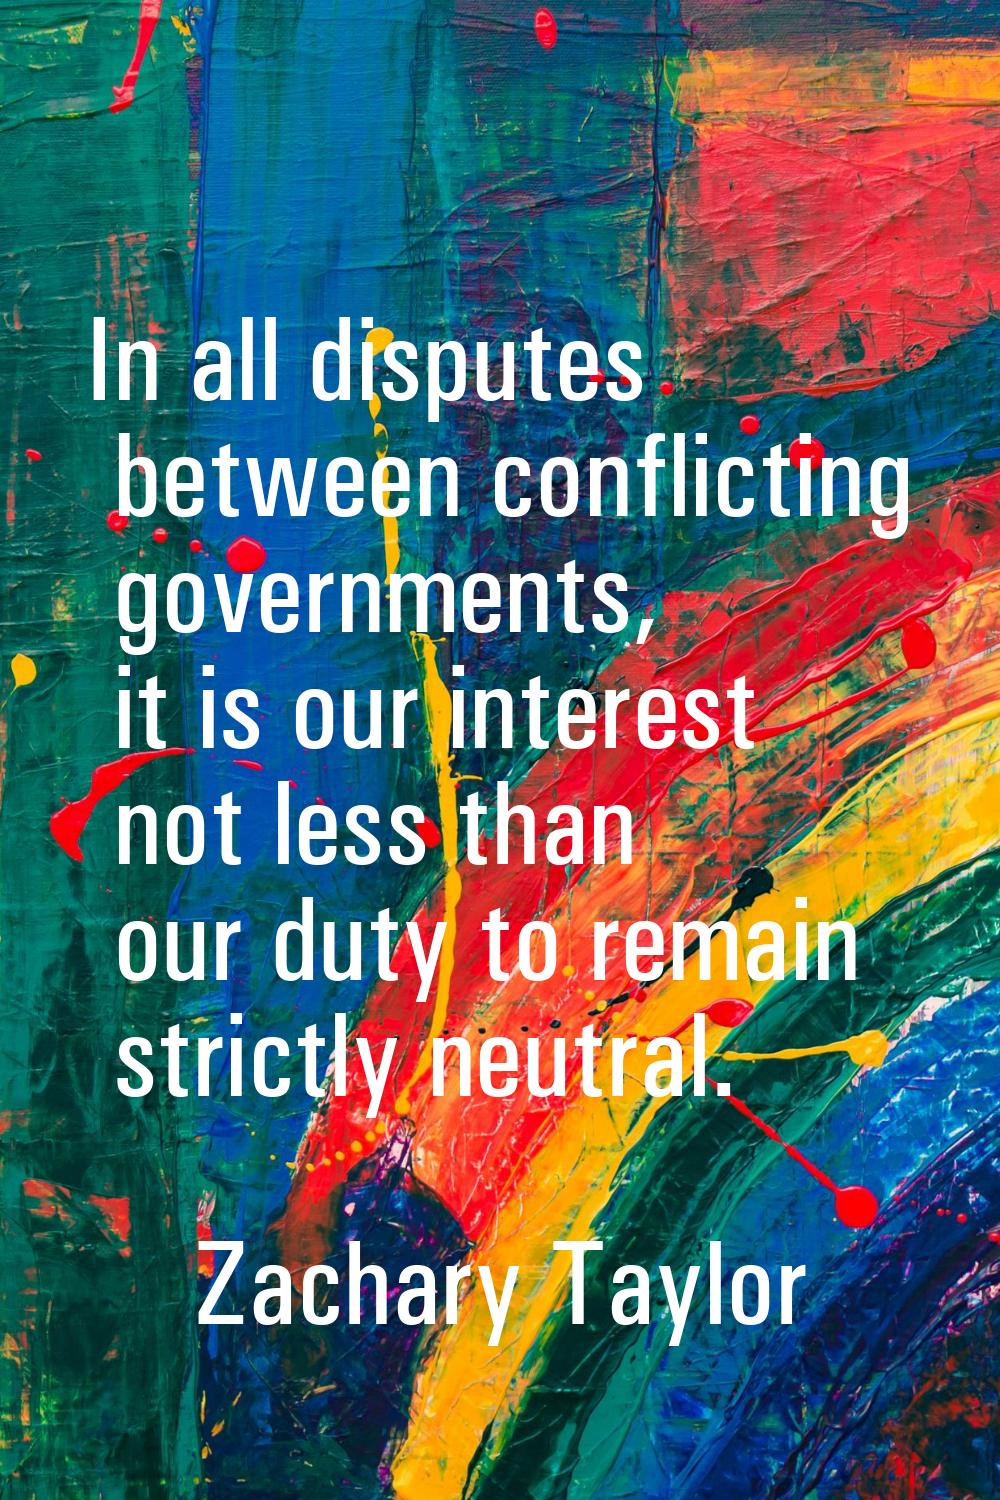 In all disputes between conflicting governments, it is our interest not less than our duty to remai